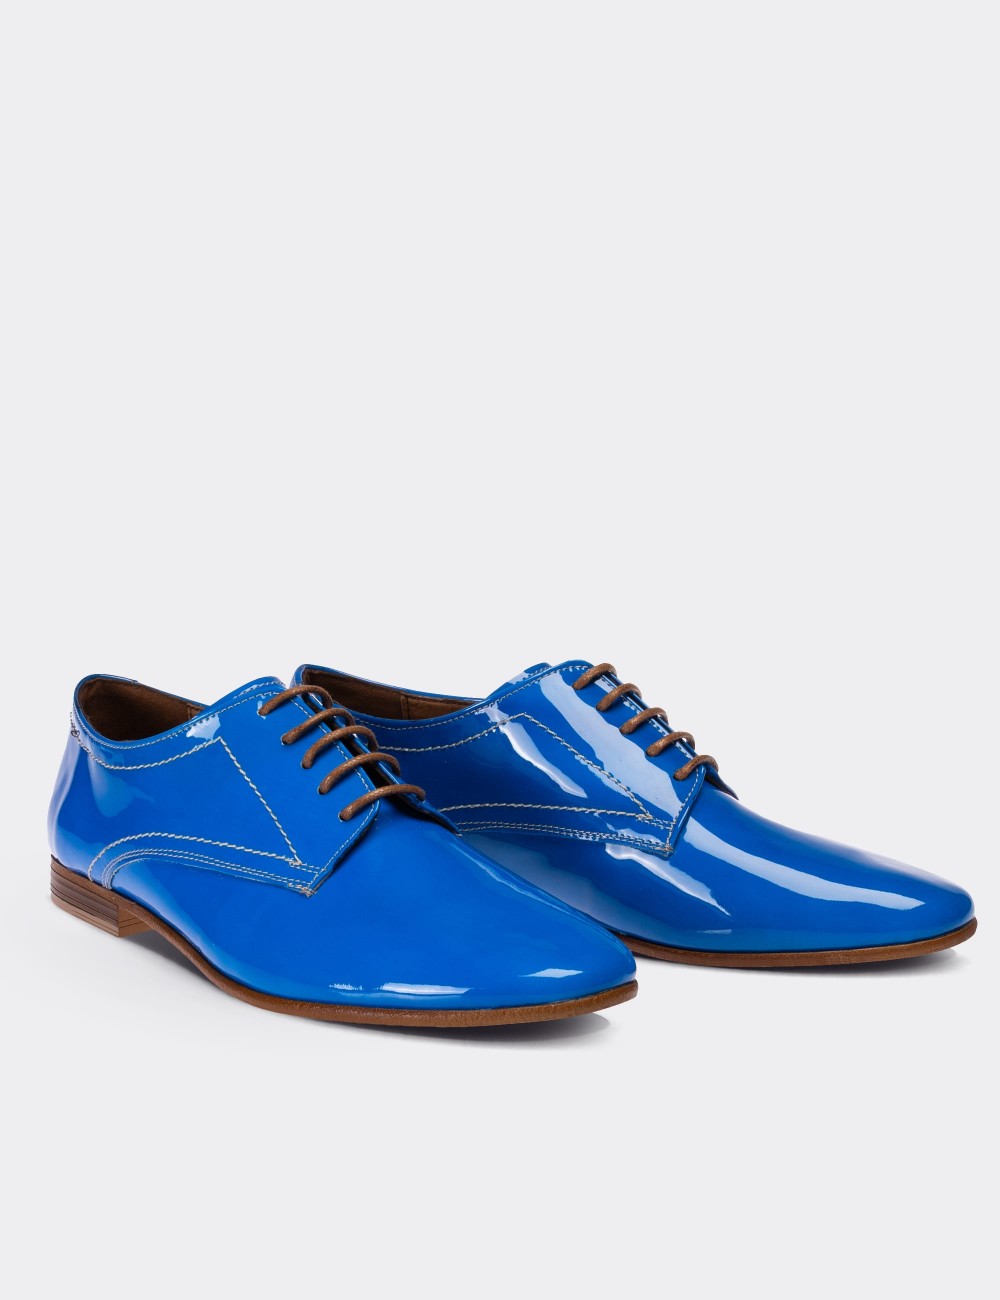 Blue Patent Leather Lace-up Shoes - 01430ZMVIC05